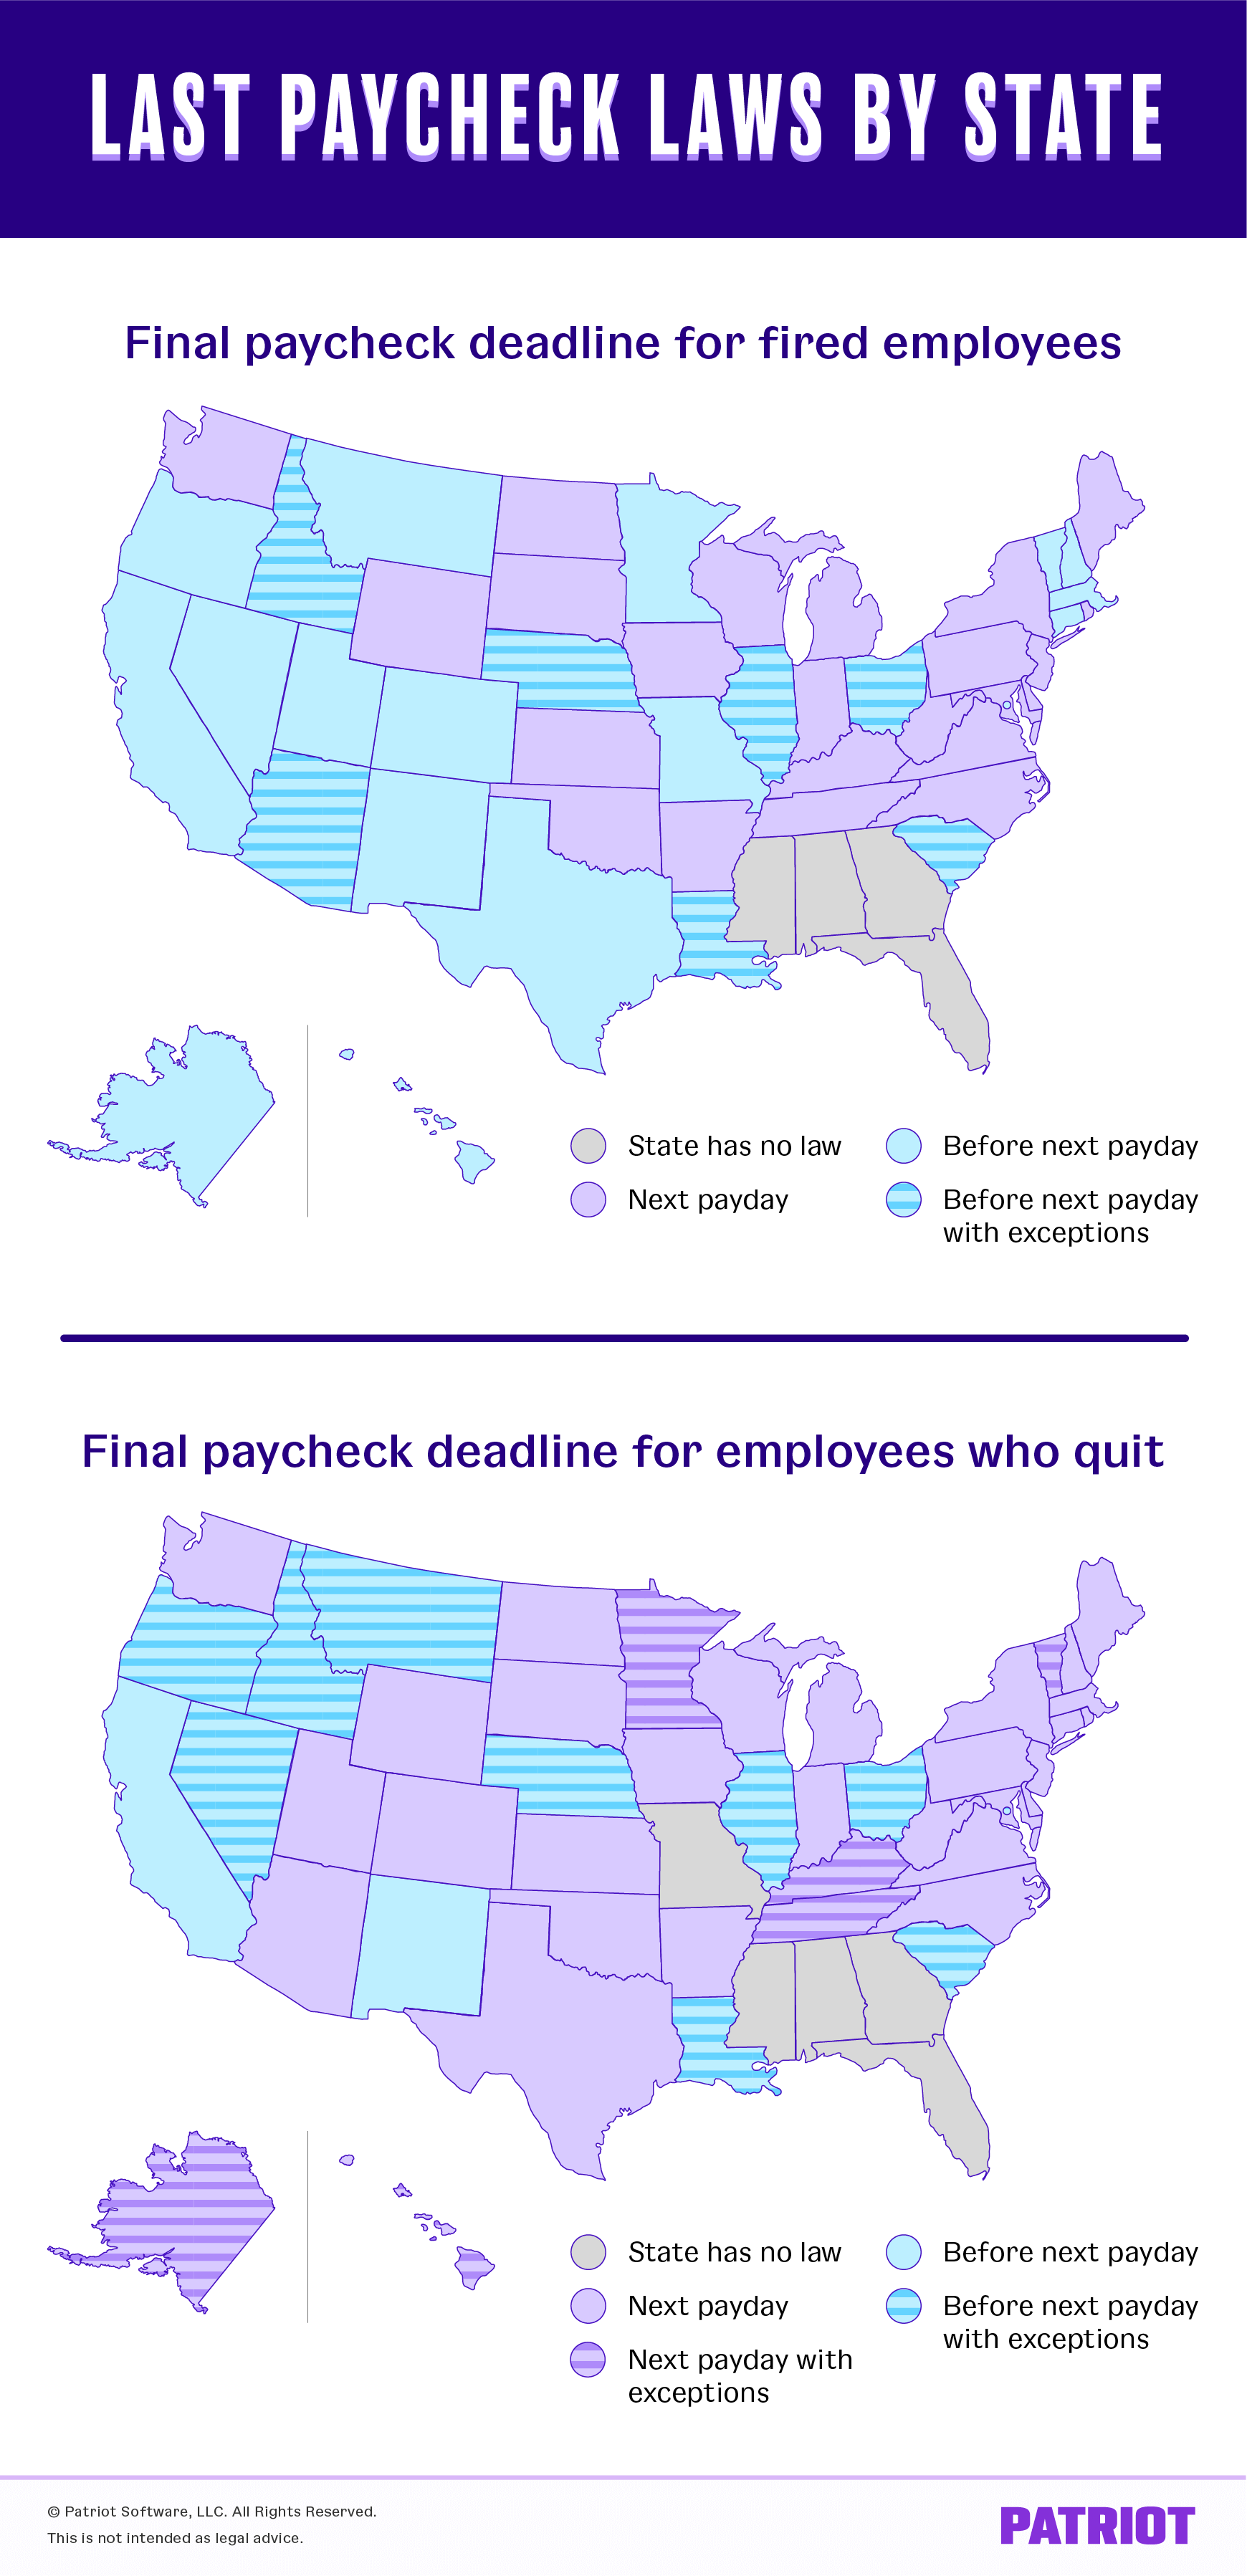 final paycheck laws by state maps (fired employees and employees who quit)